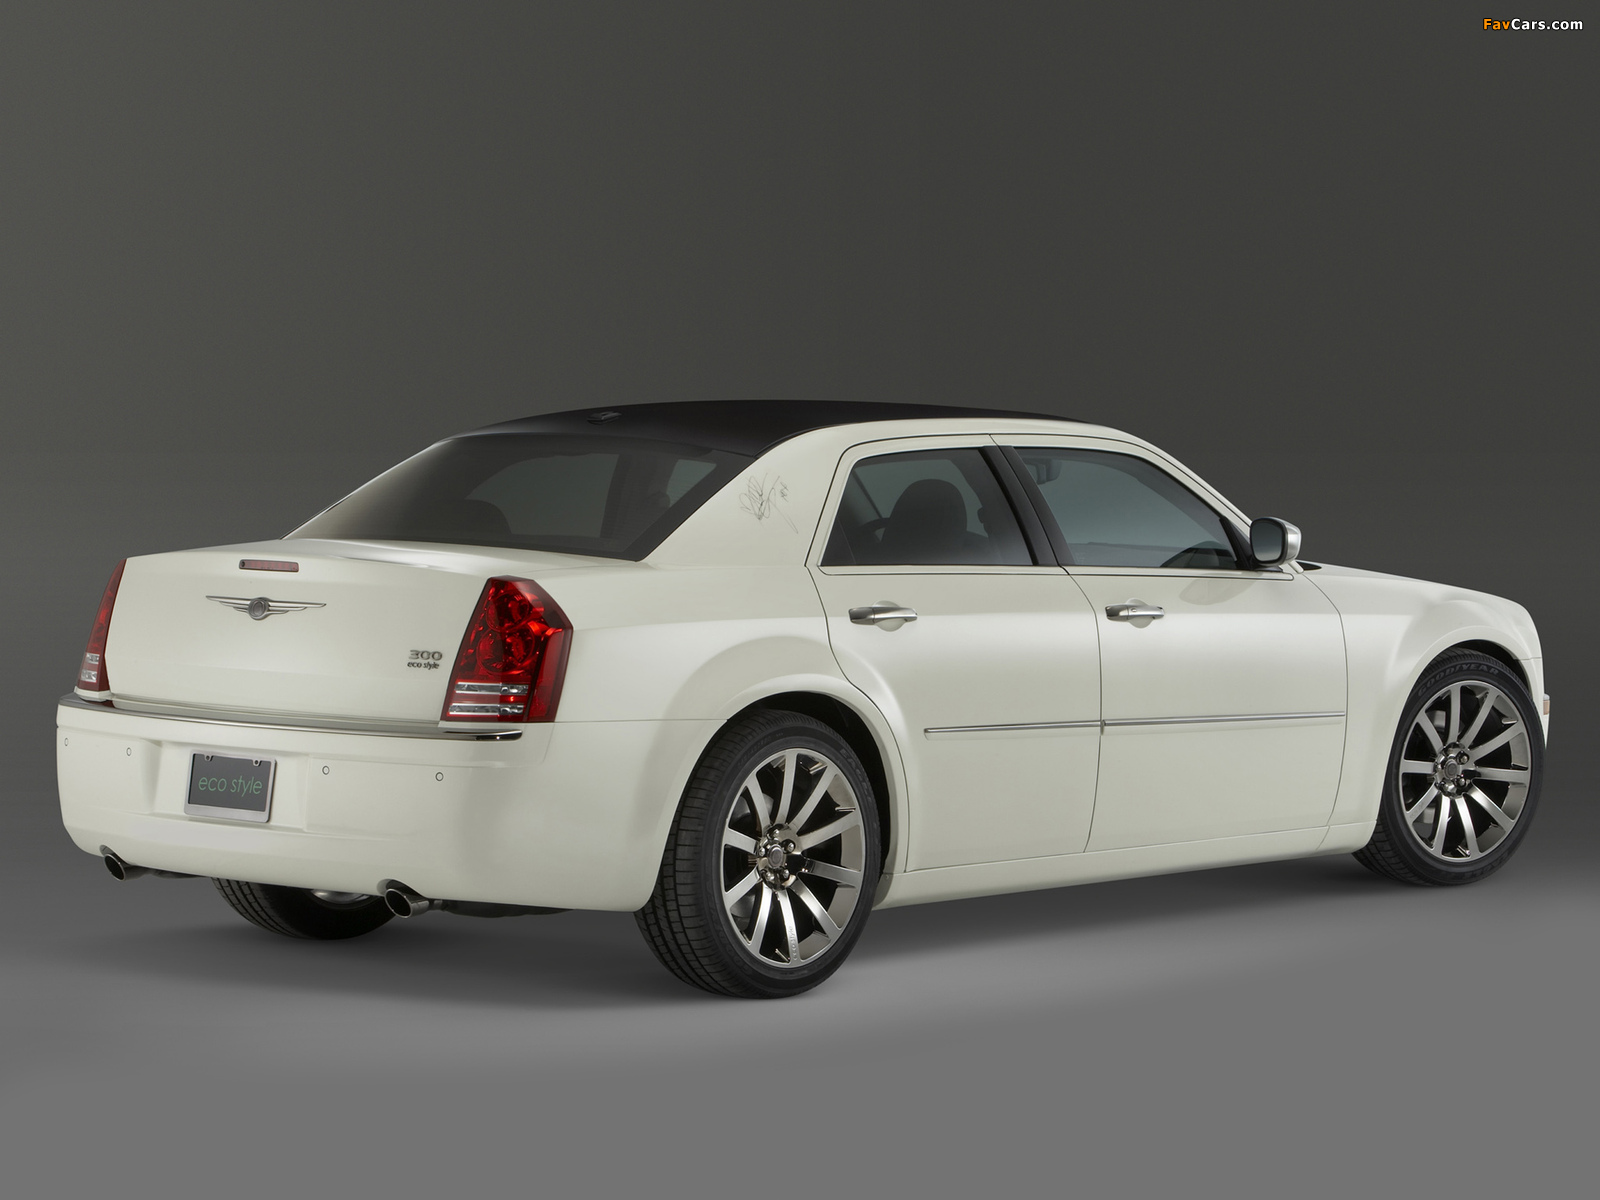 Chrysler 300 EcoStyle Concept (LX) 2010 wallpapers (1600 x 1200)